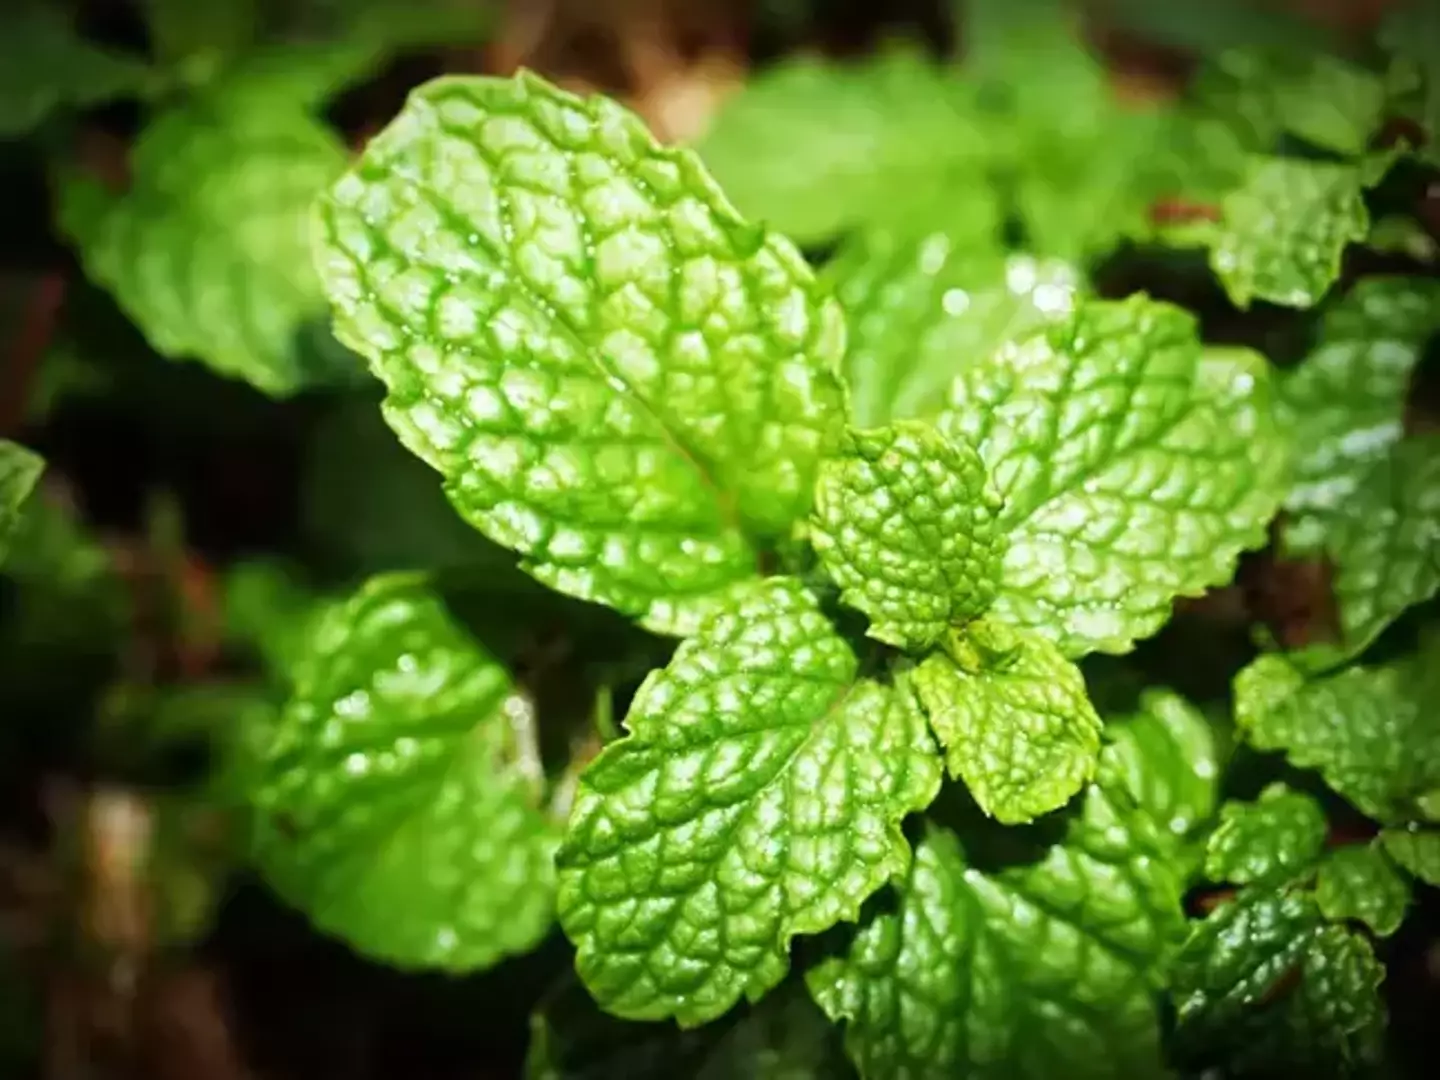 Spiders hate the smell of mint so they're less likely to be in the mood for sex if you've got mint plants around the house.